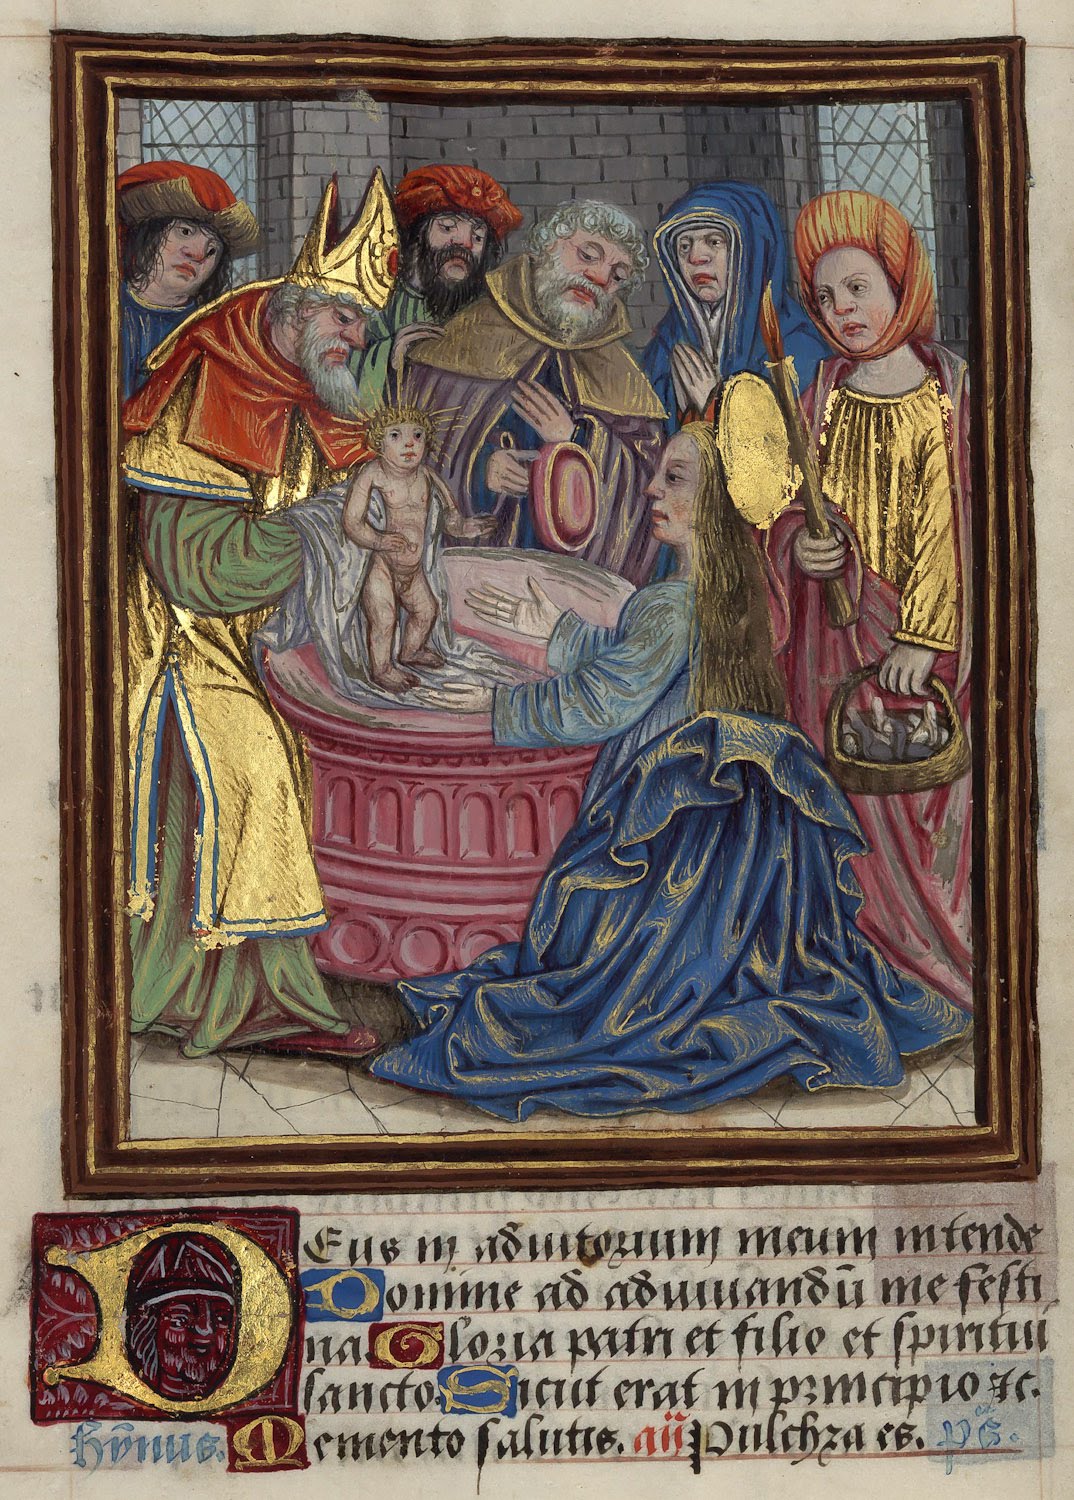 Unknown, Purification and the Presentation in the Temple (Miniature extracted from the Book of Hours of the Family Of Ovens. Library and Multimedia Library of Nancy, Ms. 1874 (fol 30v)).